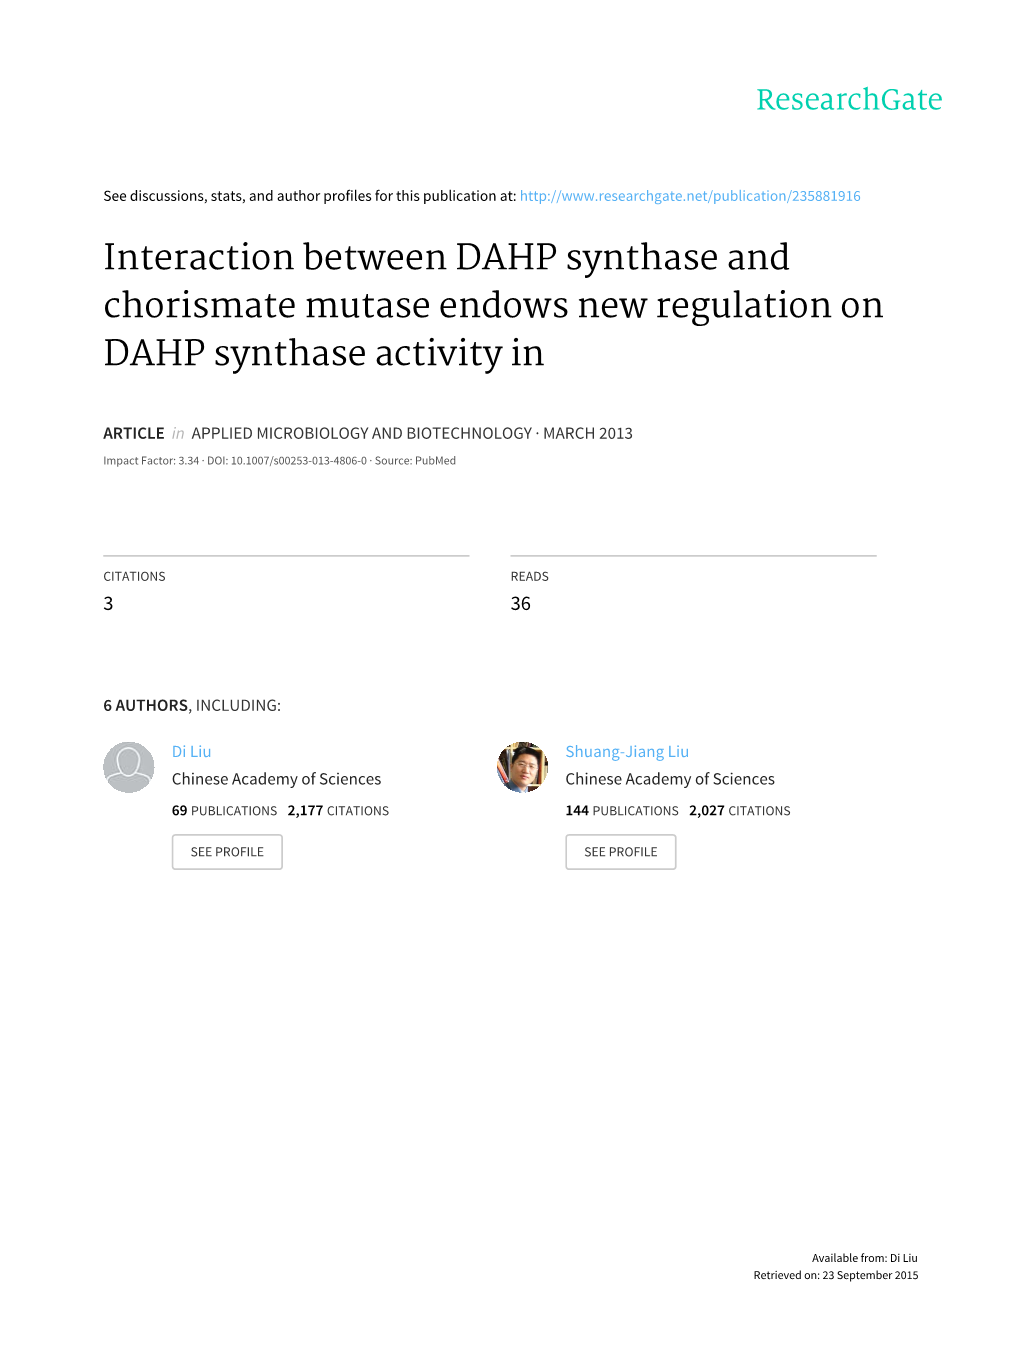 Interaction Between DAHP Synthase and Chorismate Mutase Endows New Regulation on DAHP Synthase Activity In